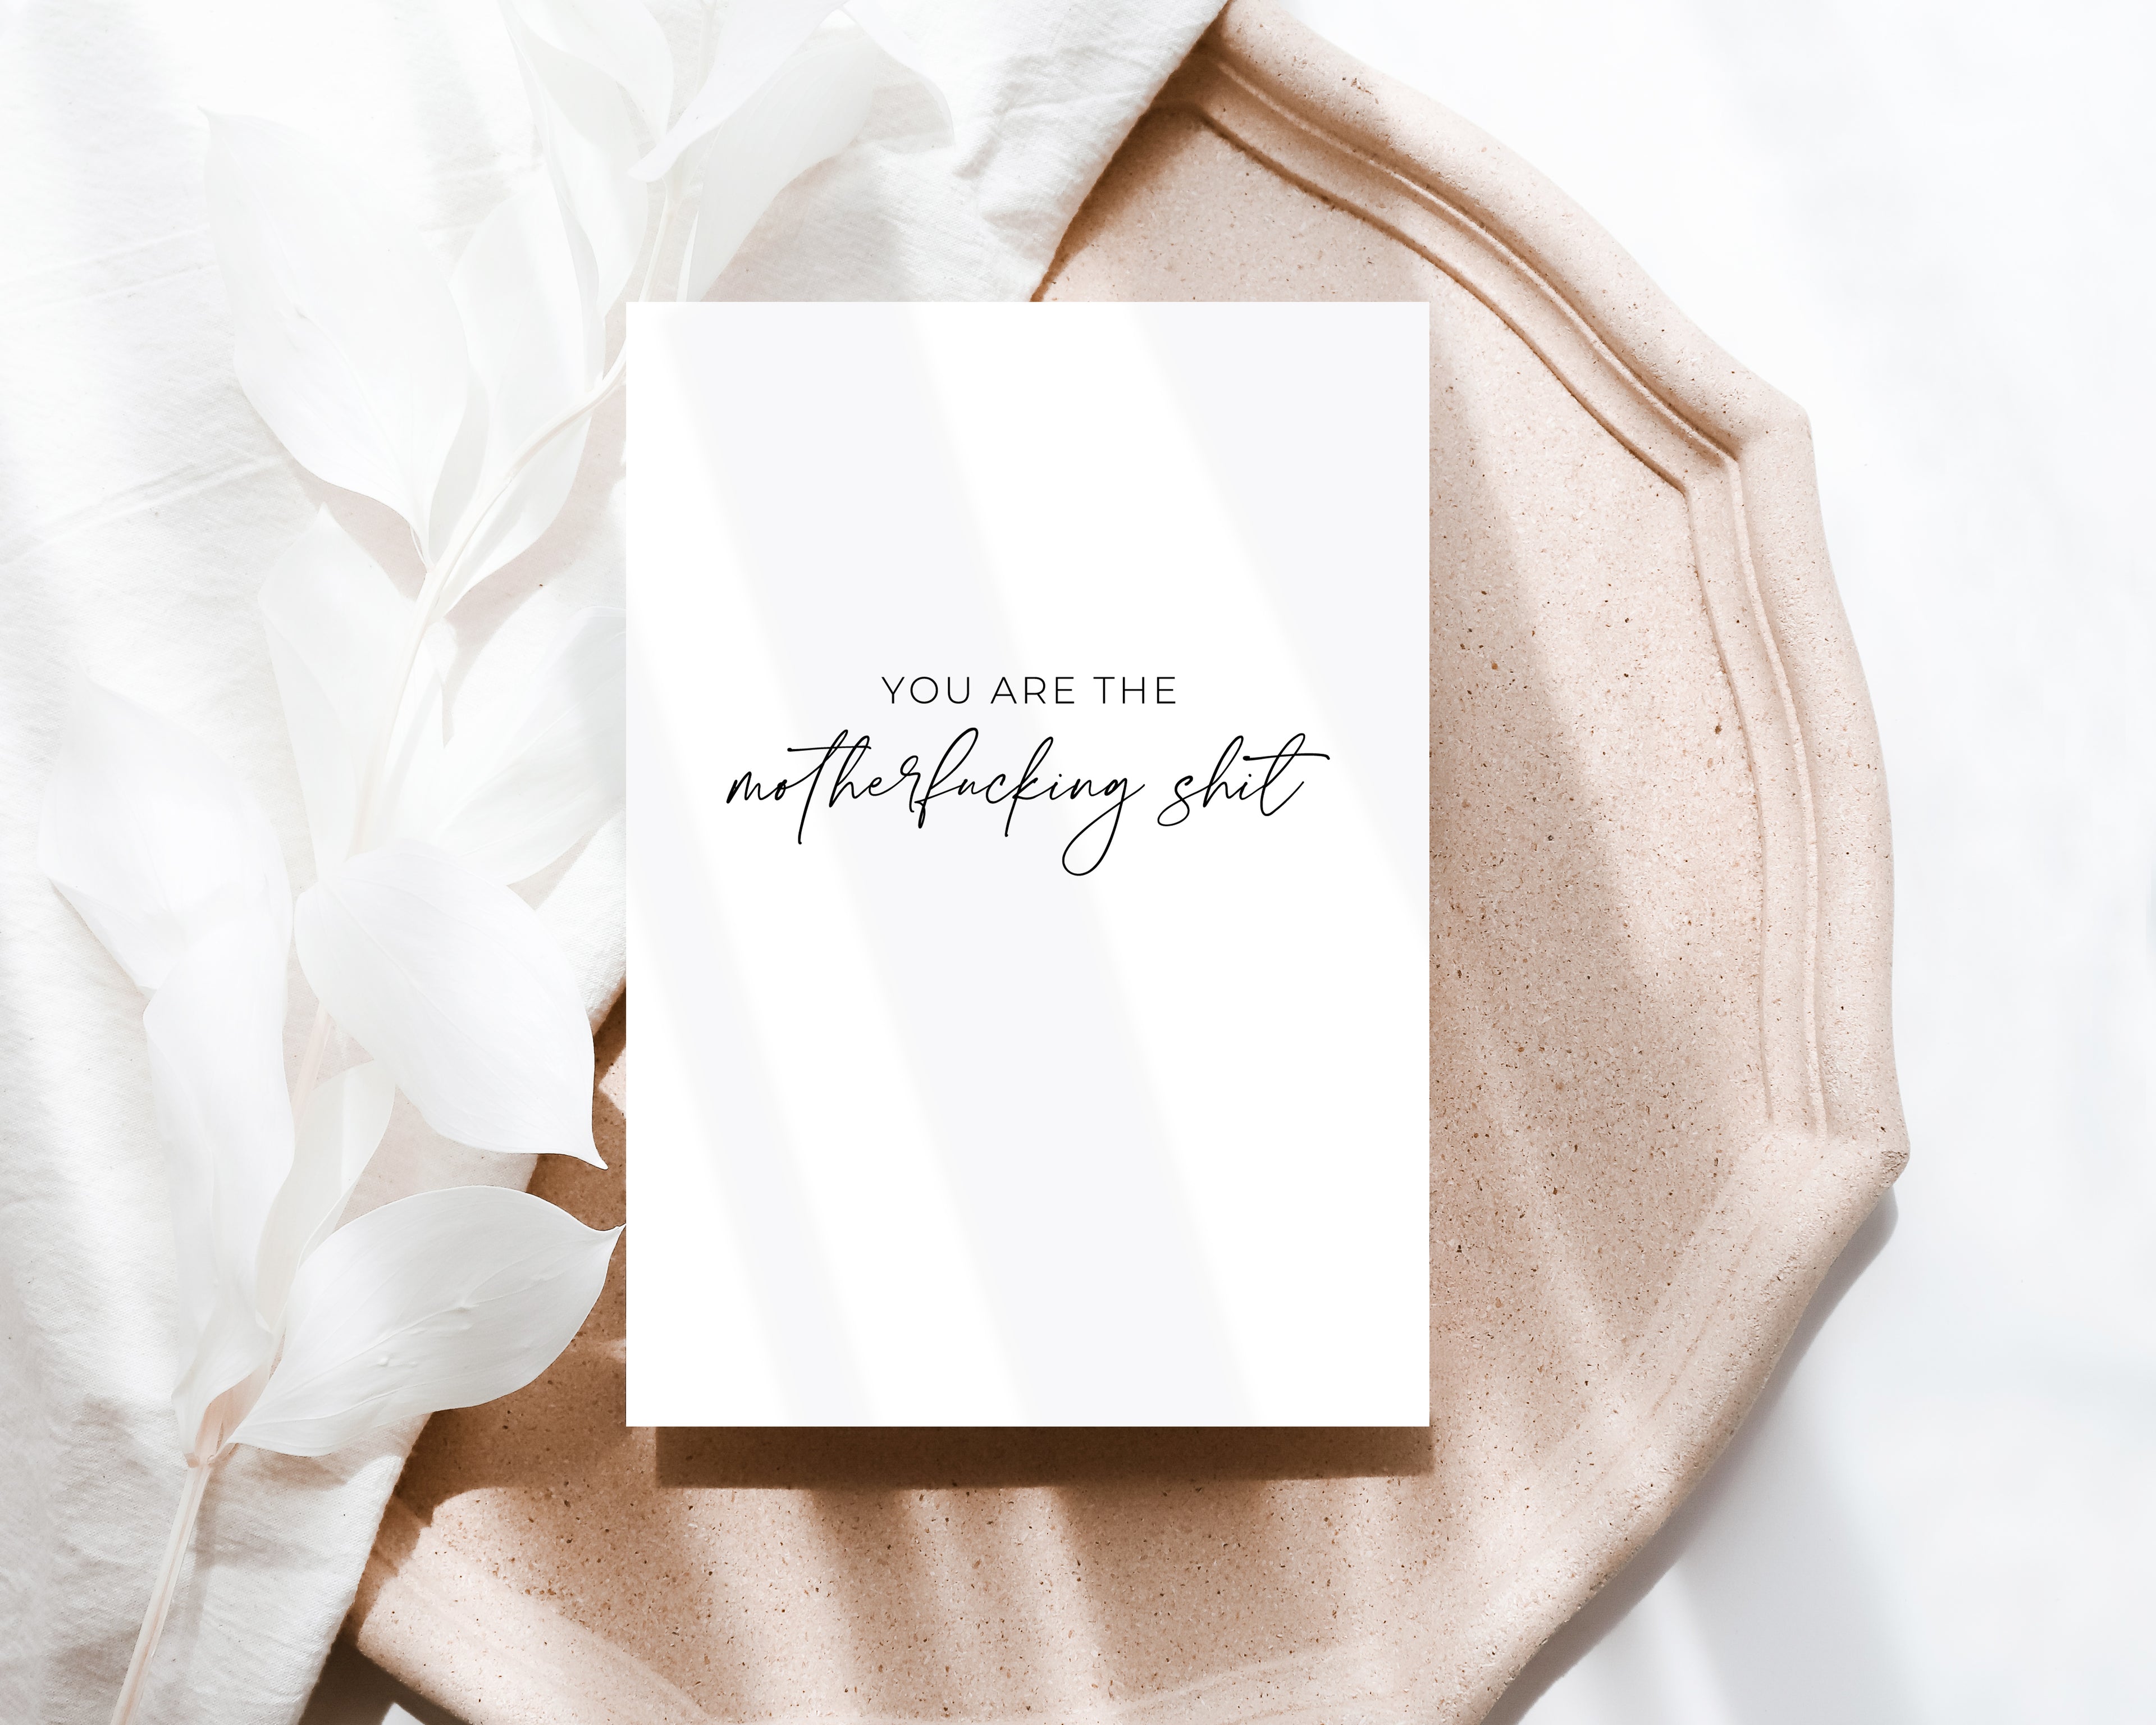 You are the motherfucking shit  - Creativien